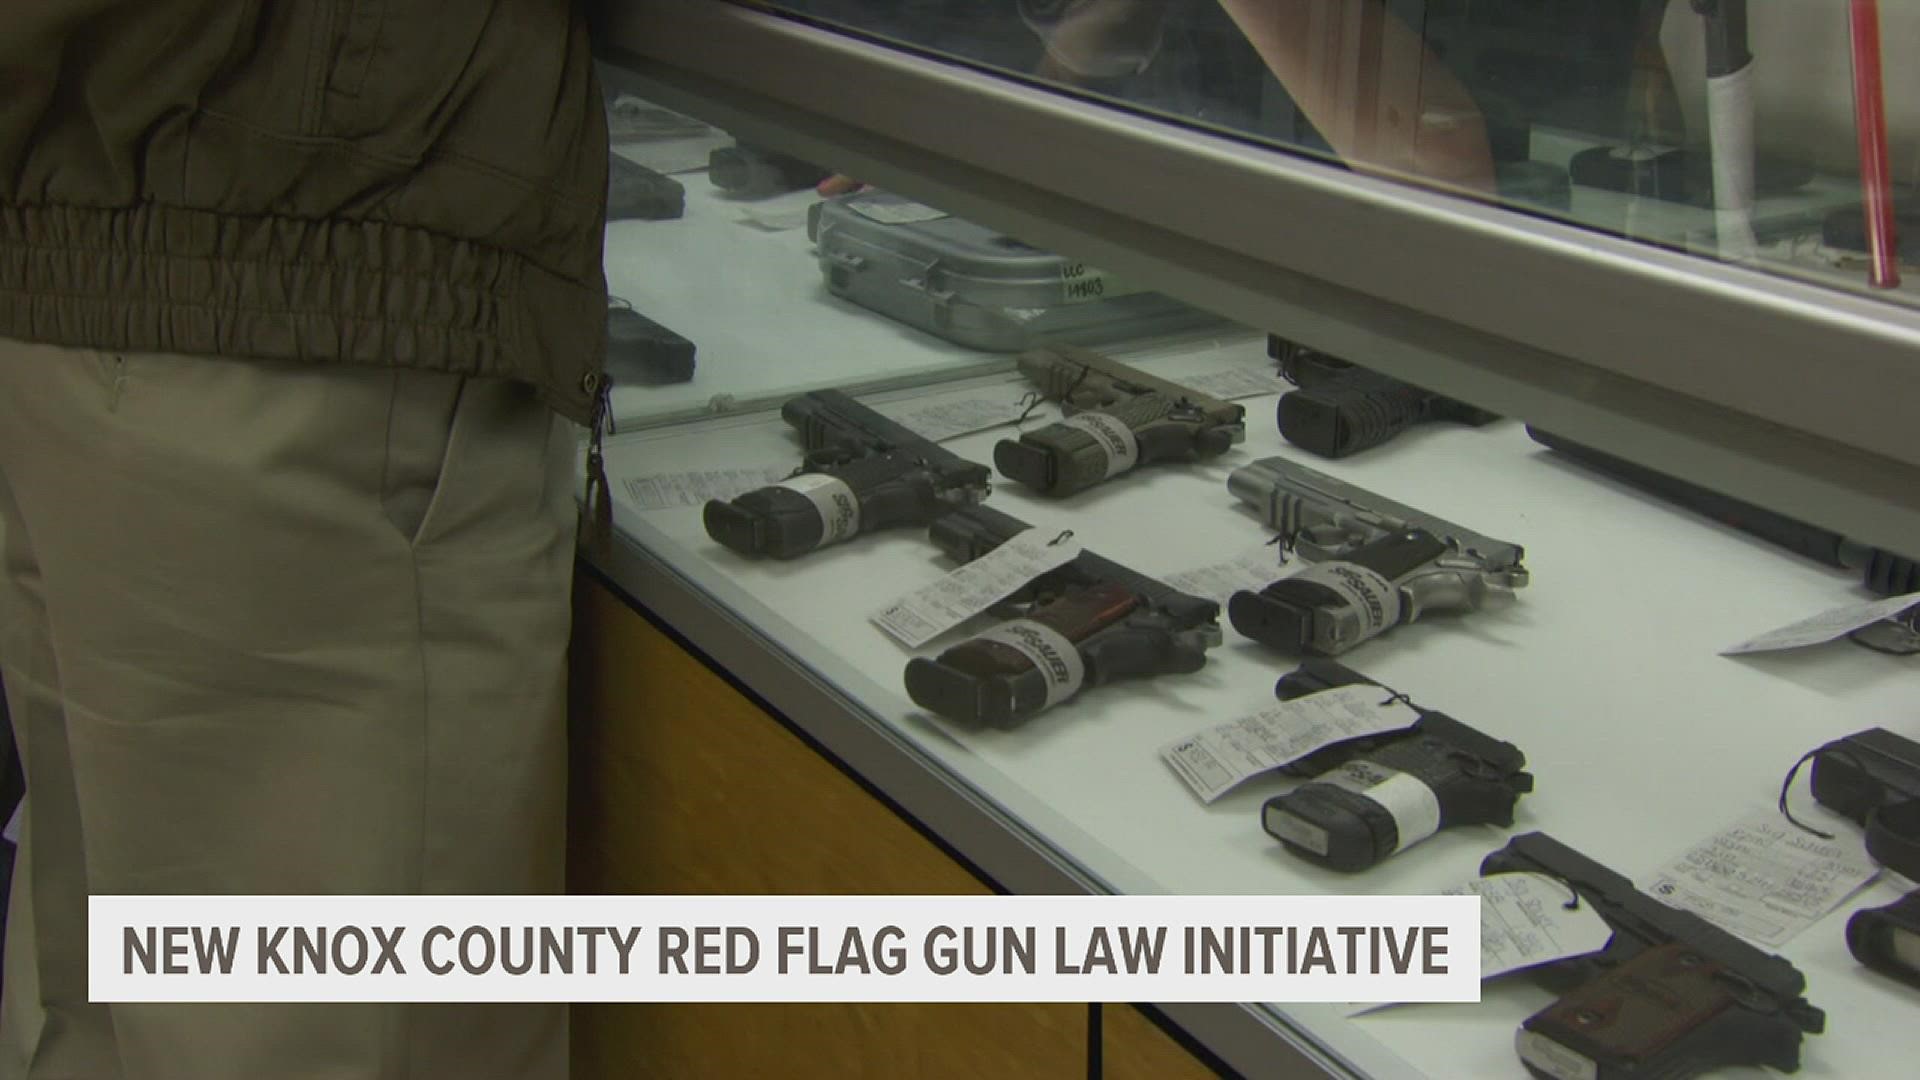 The Illinois Firearm Restraining Orders are part of the state's Red Flag Laws and anyone can file them if they think someone is a danger to themselves or others.